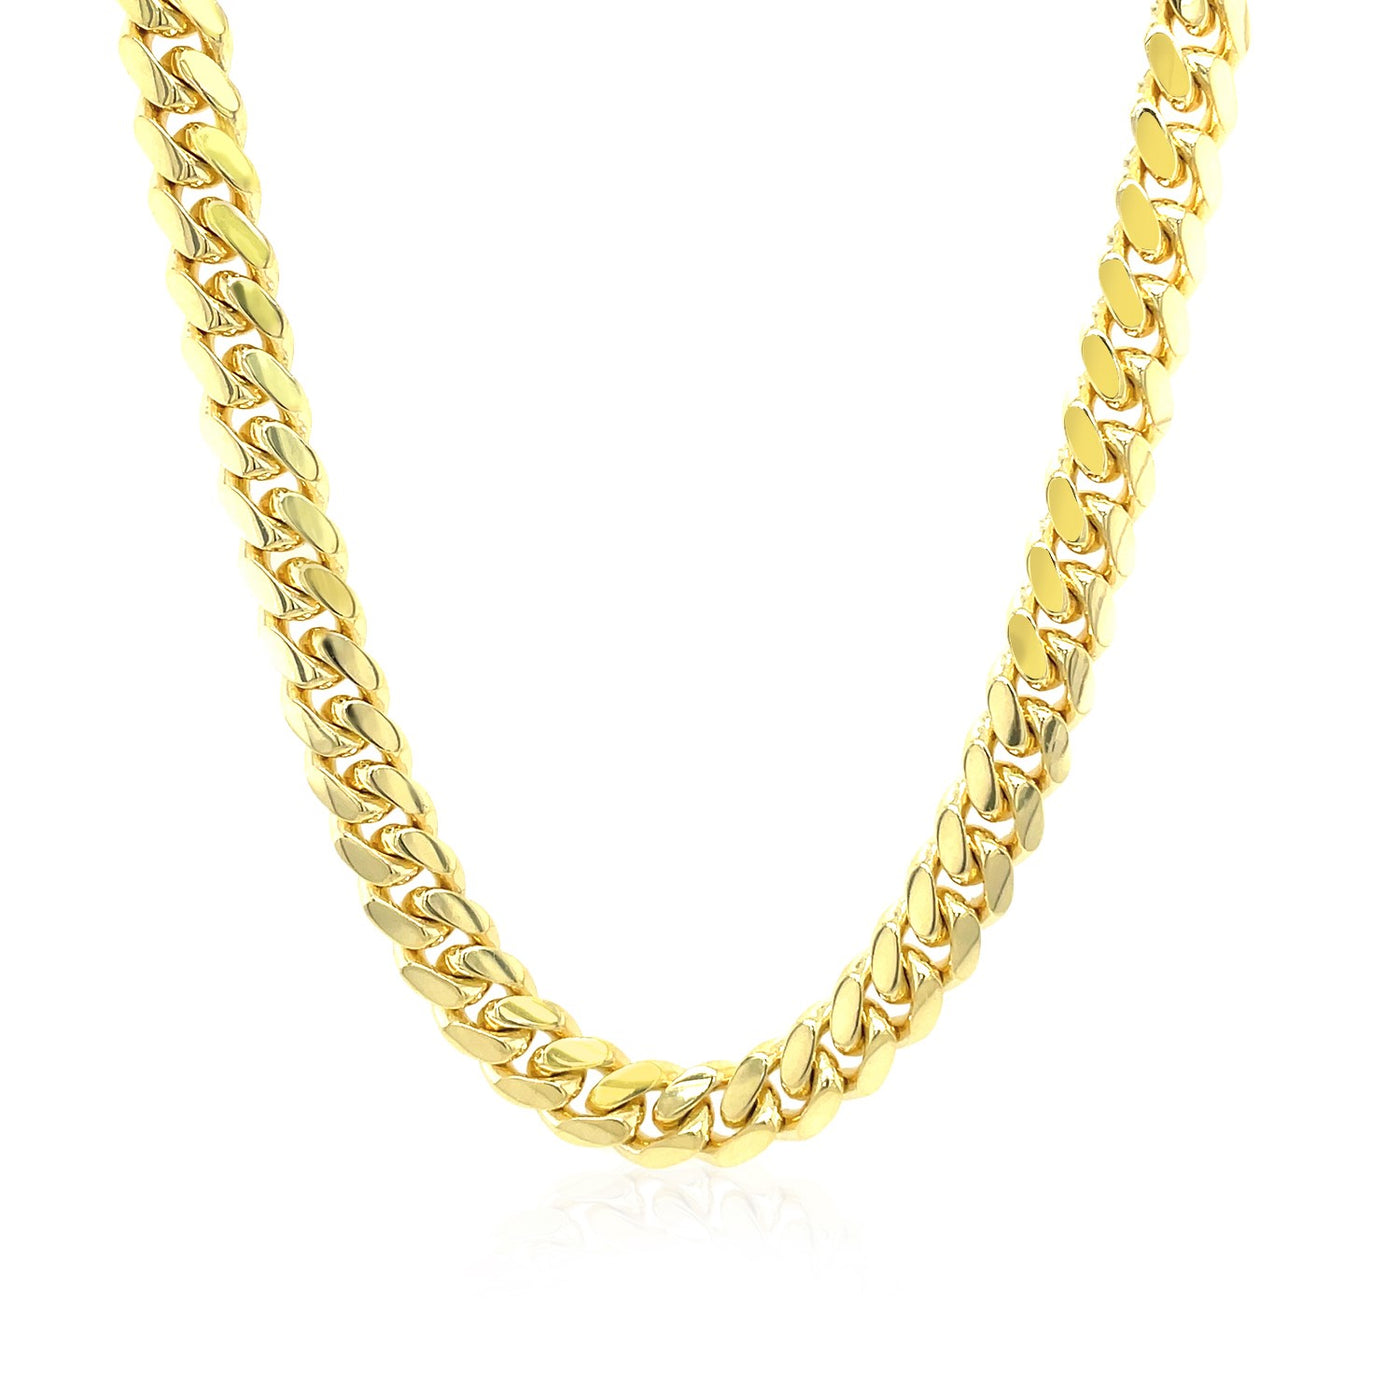 6mm 14k Yellow Gold Classic Miami Cuban Solid Chain